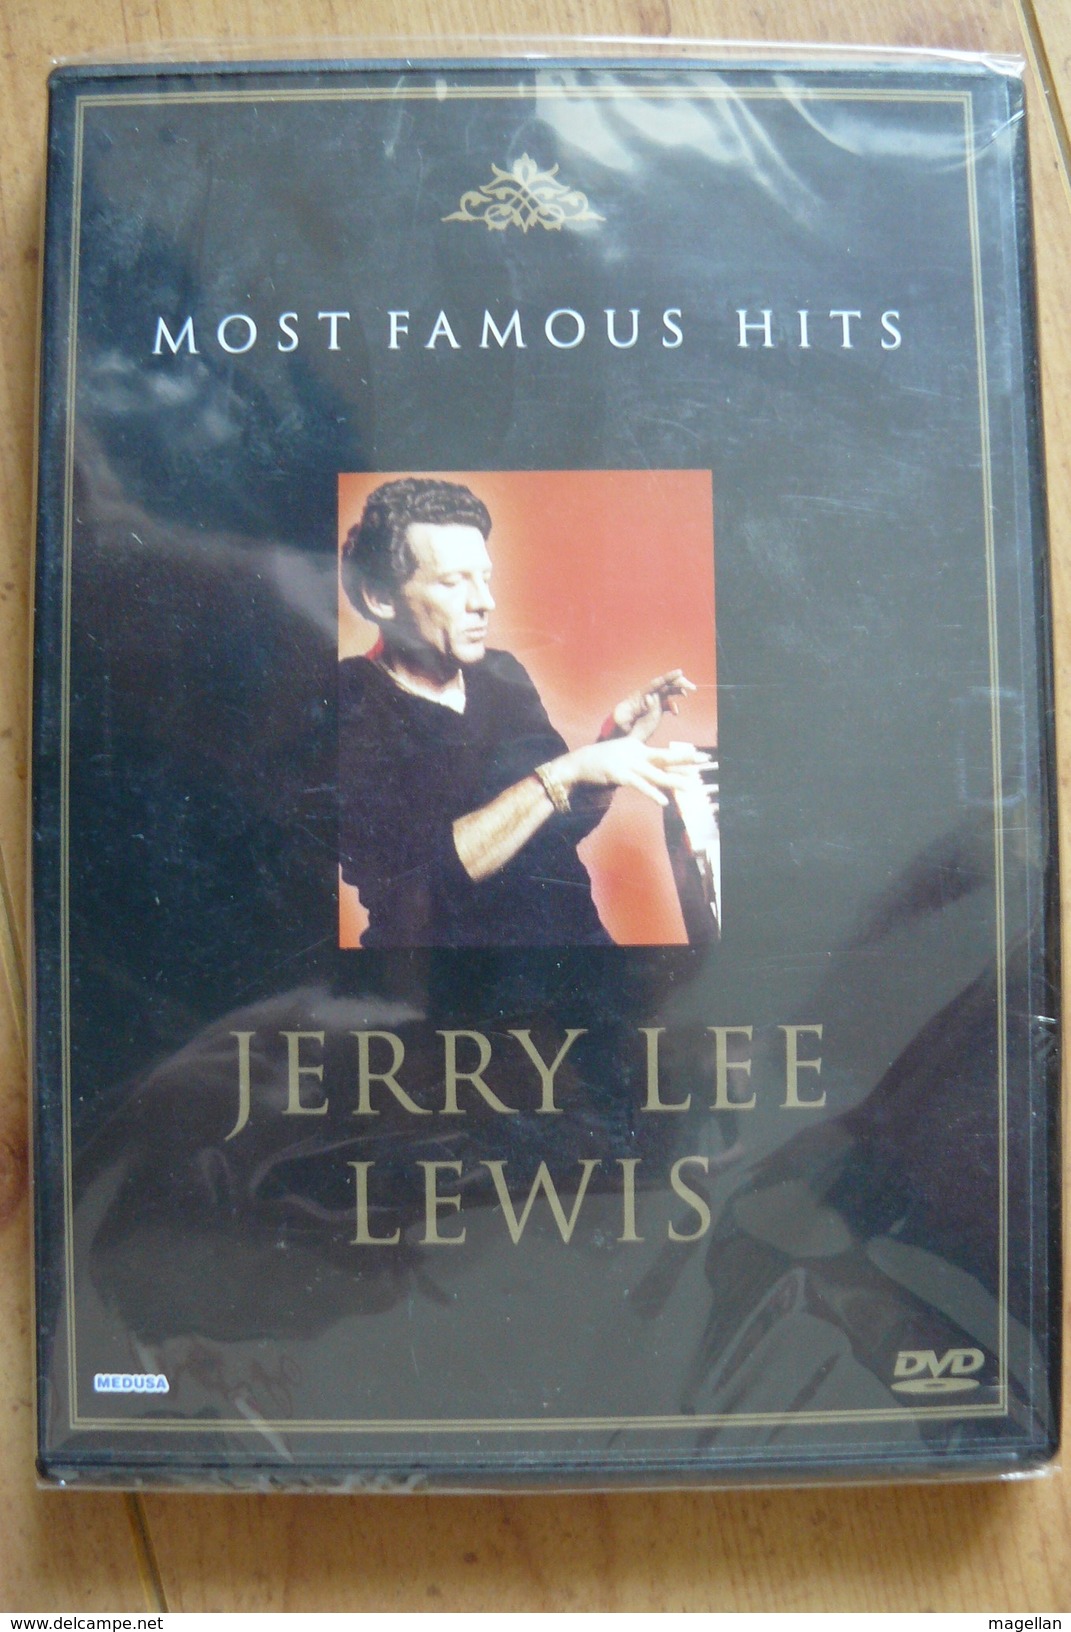 Jerry Lee Lewis - Most Famous Hits - DVD Neuf Sous Blister 2003 - Concerto E Musica